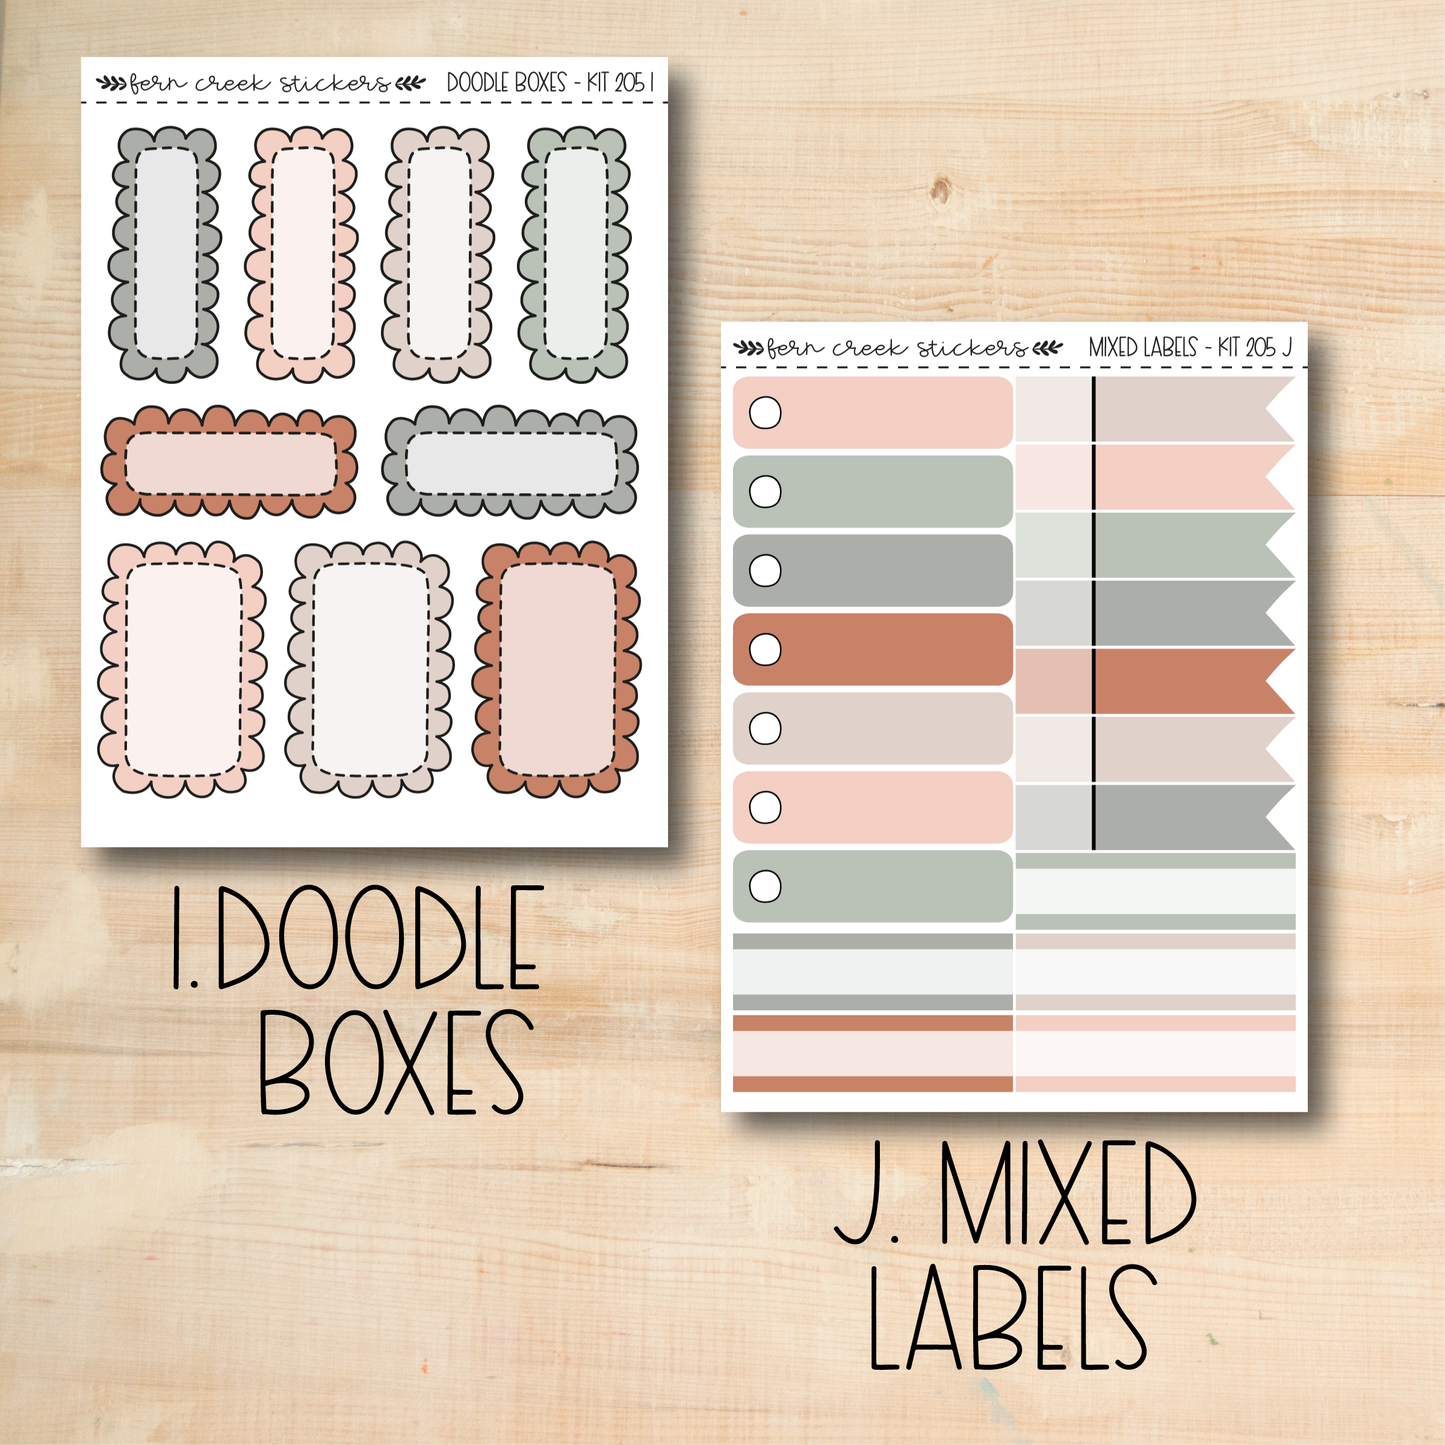 a printable planner sticker with the words doodle boxes and a picture of